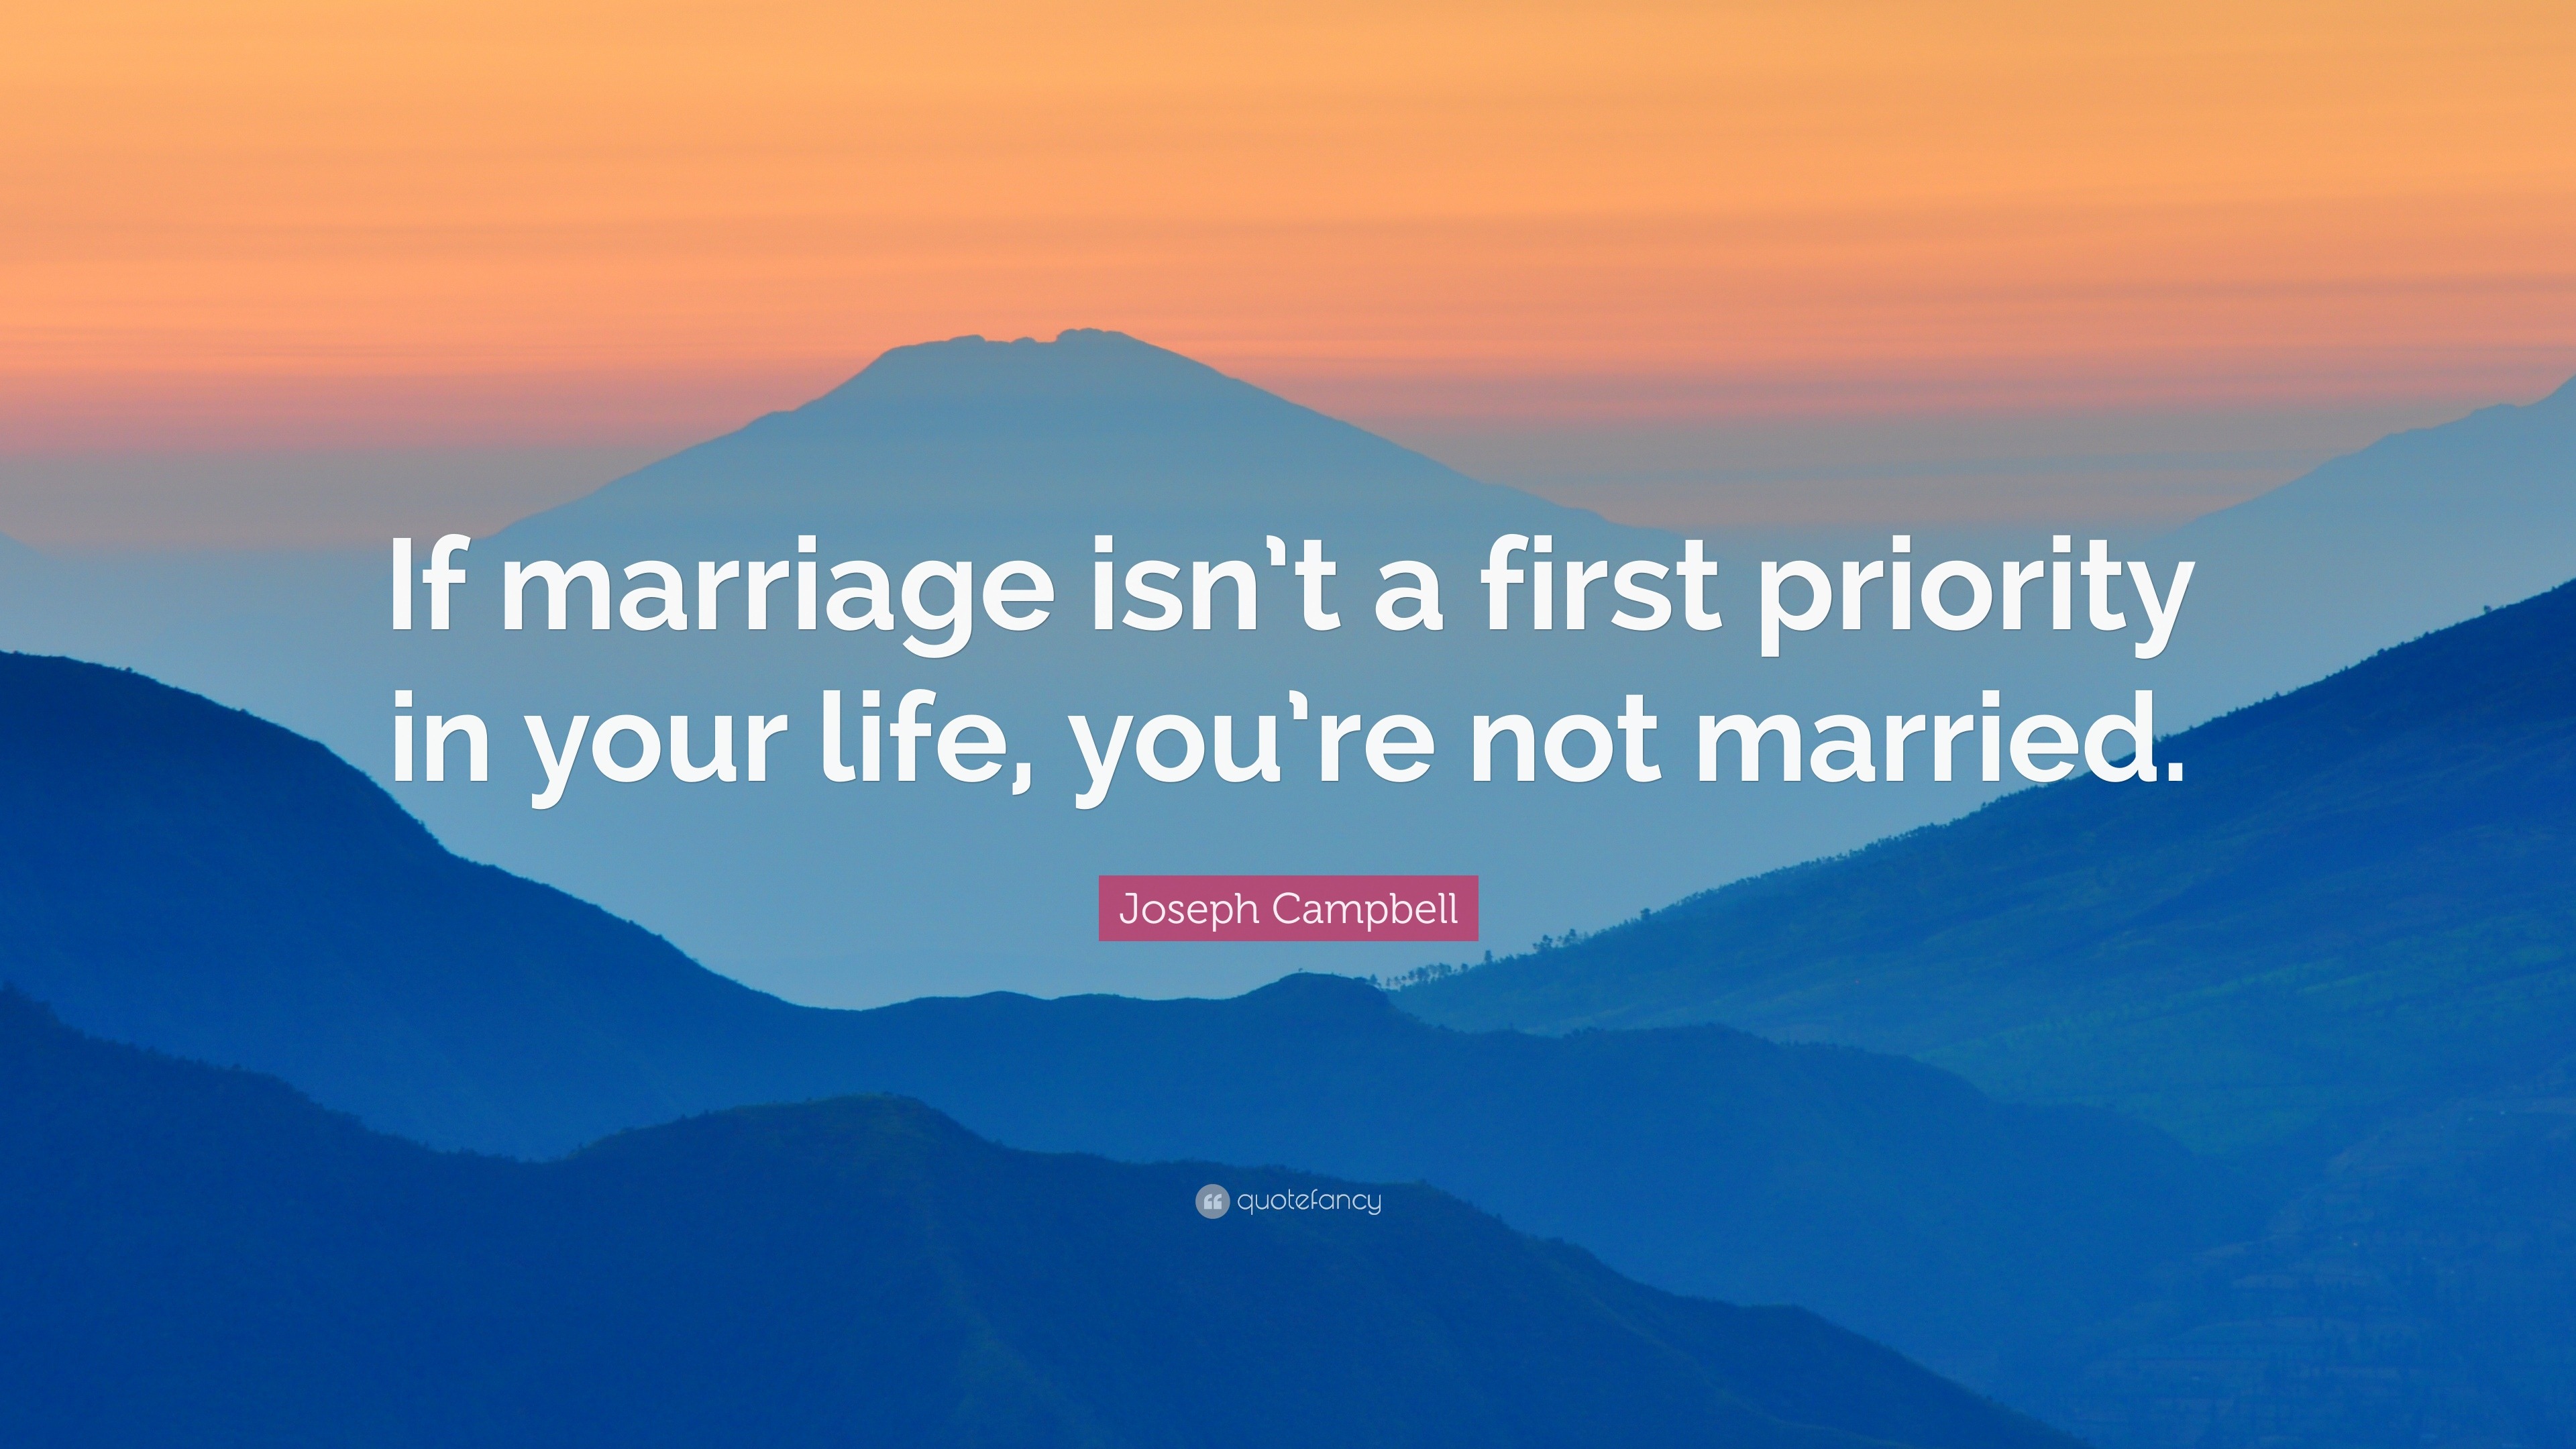 Joseph Campbell Quote: “If marriage isn’t a first priority in your life ...